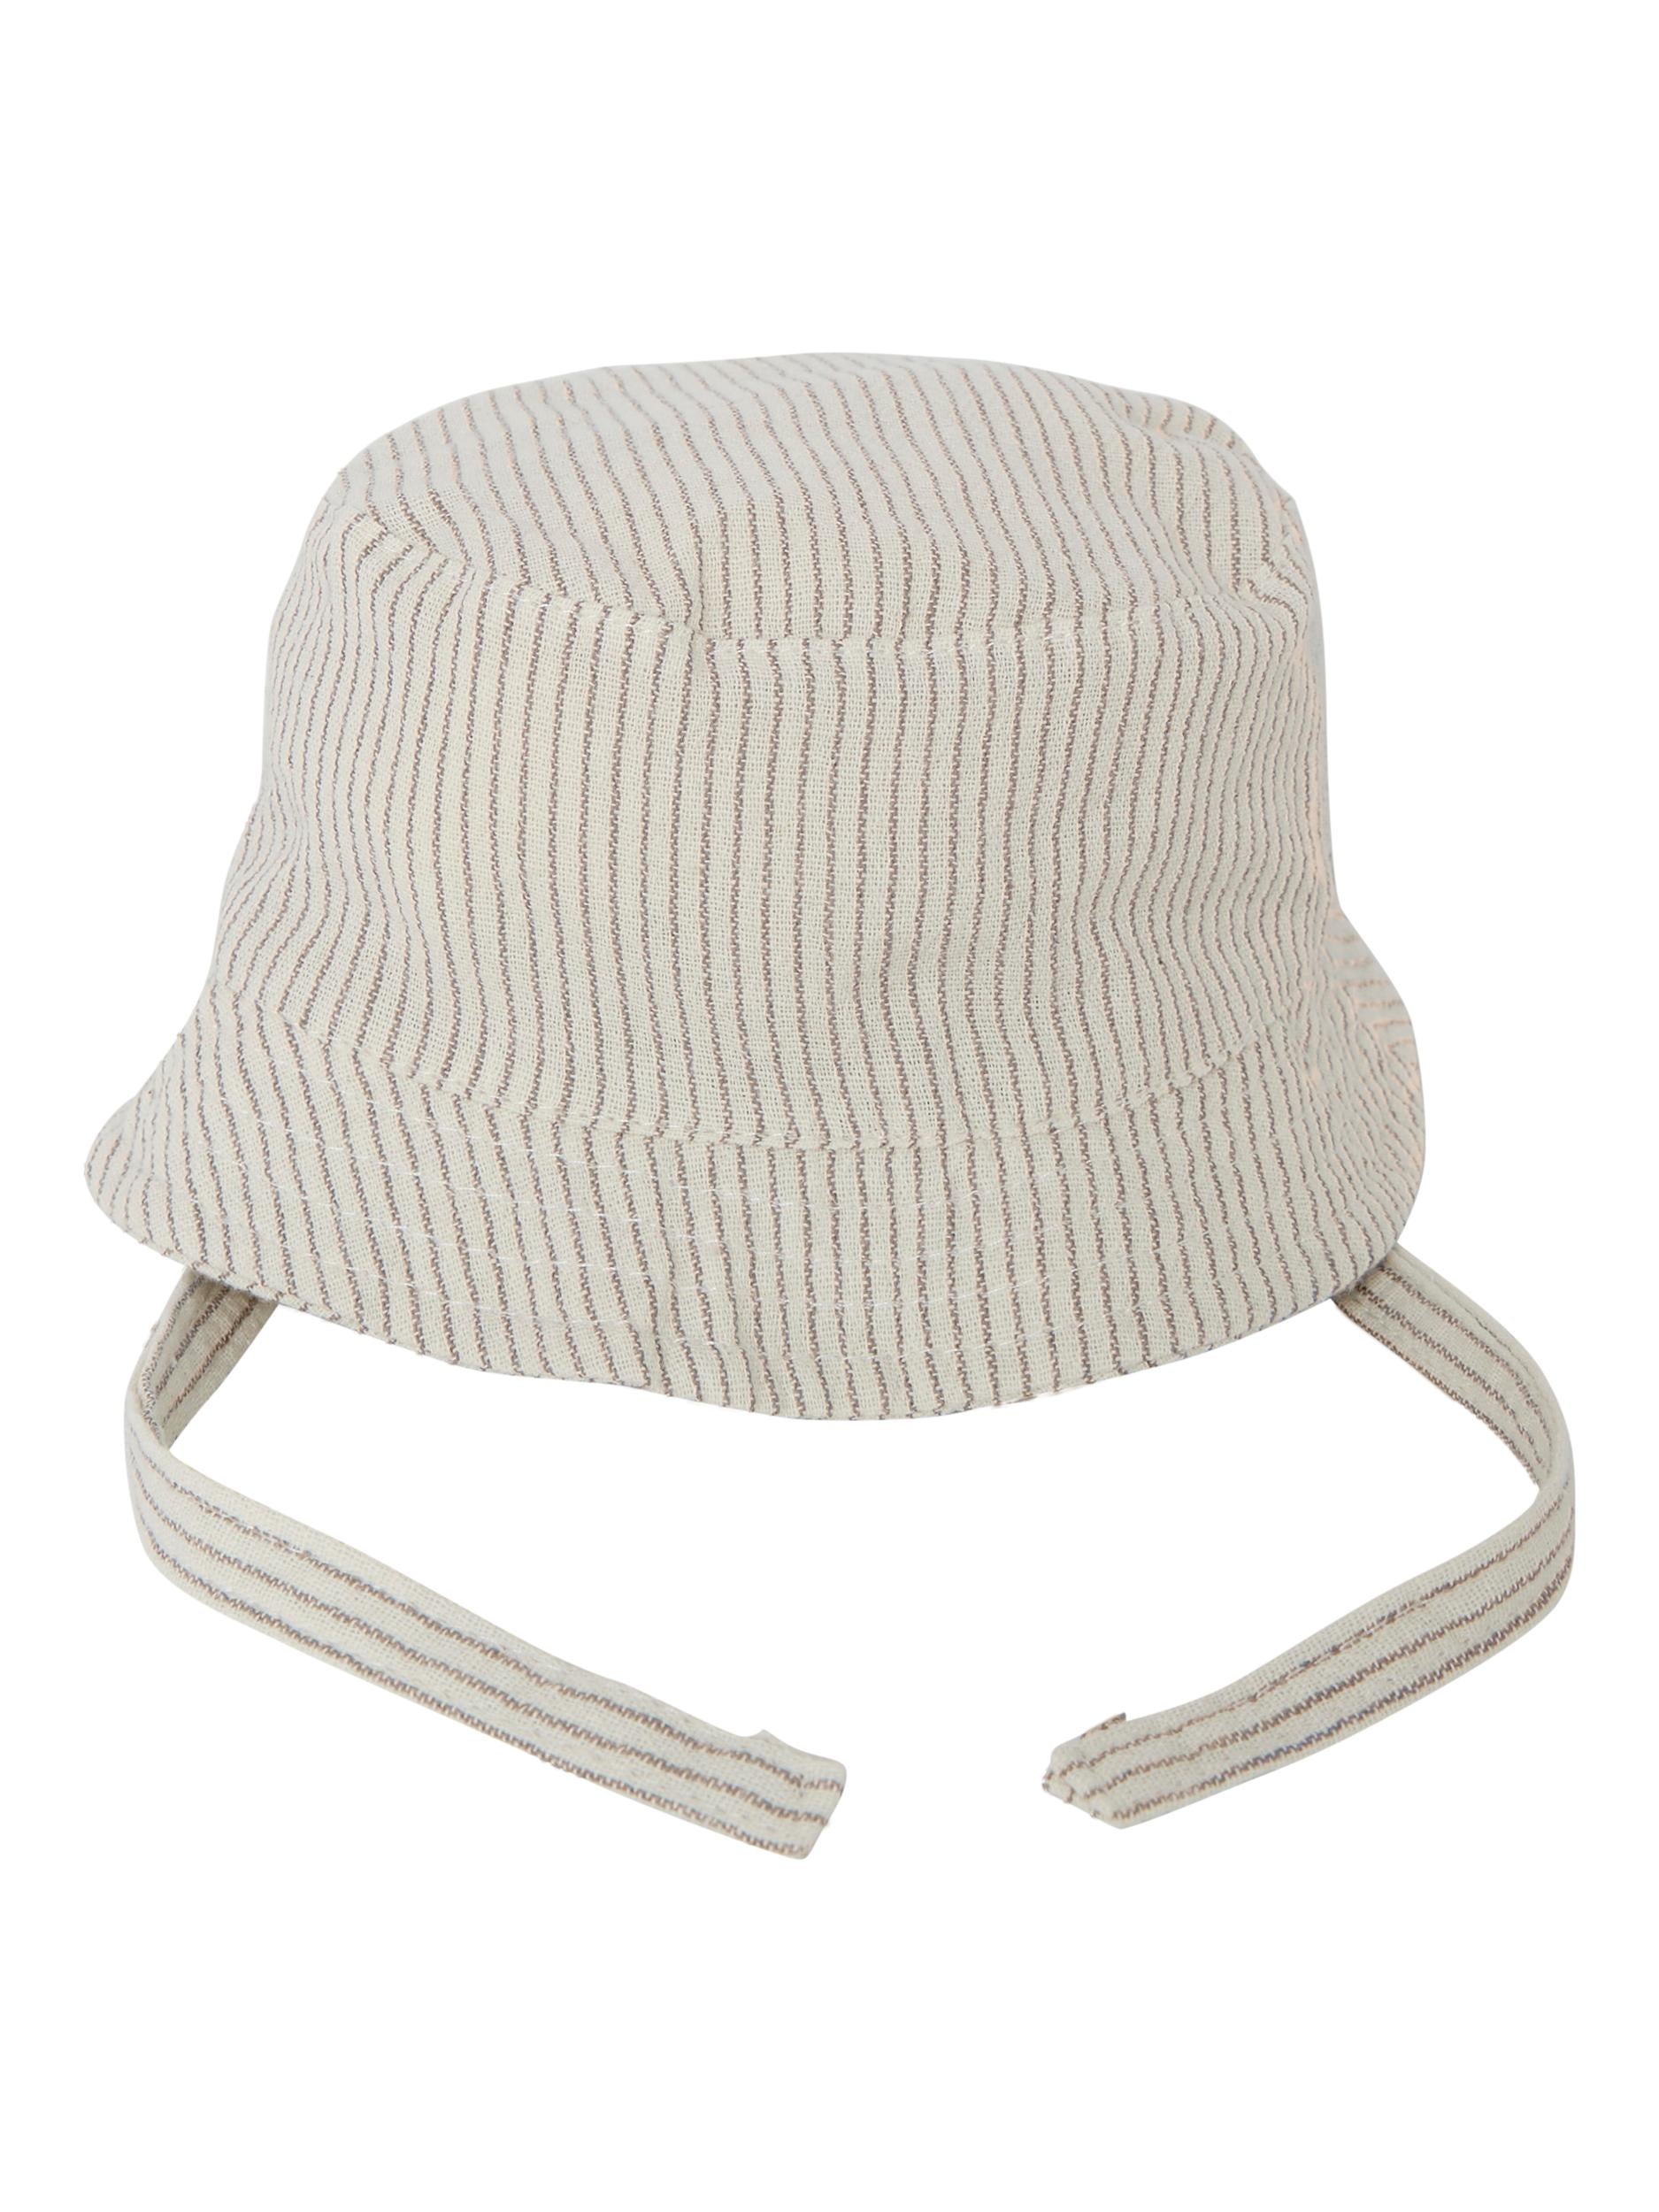 Hefanne Sun Hat With Earflaps - Weathered Teak Full View